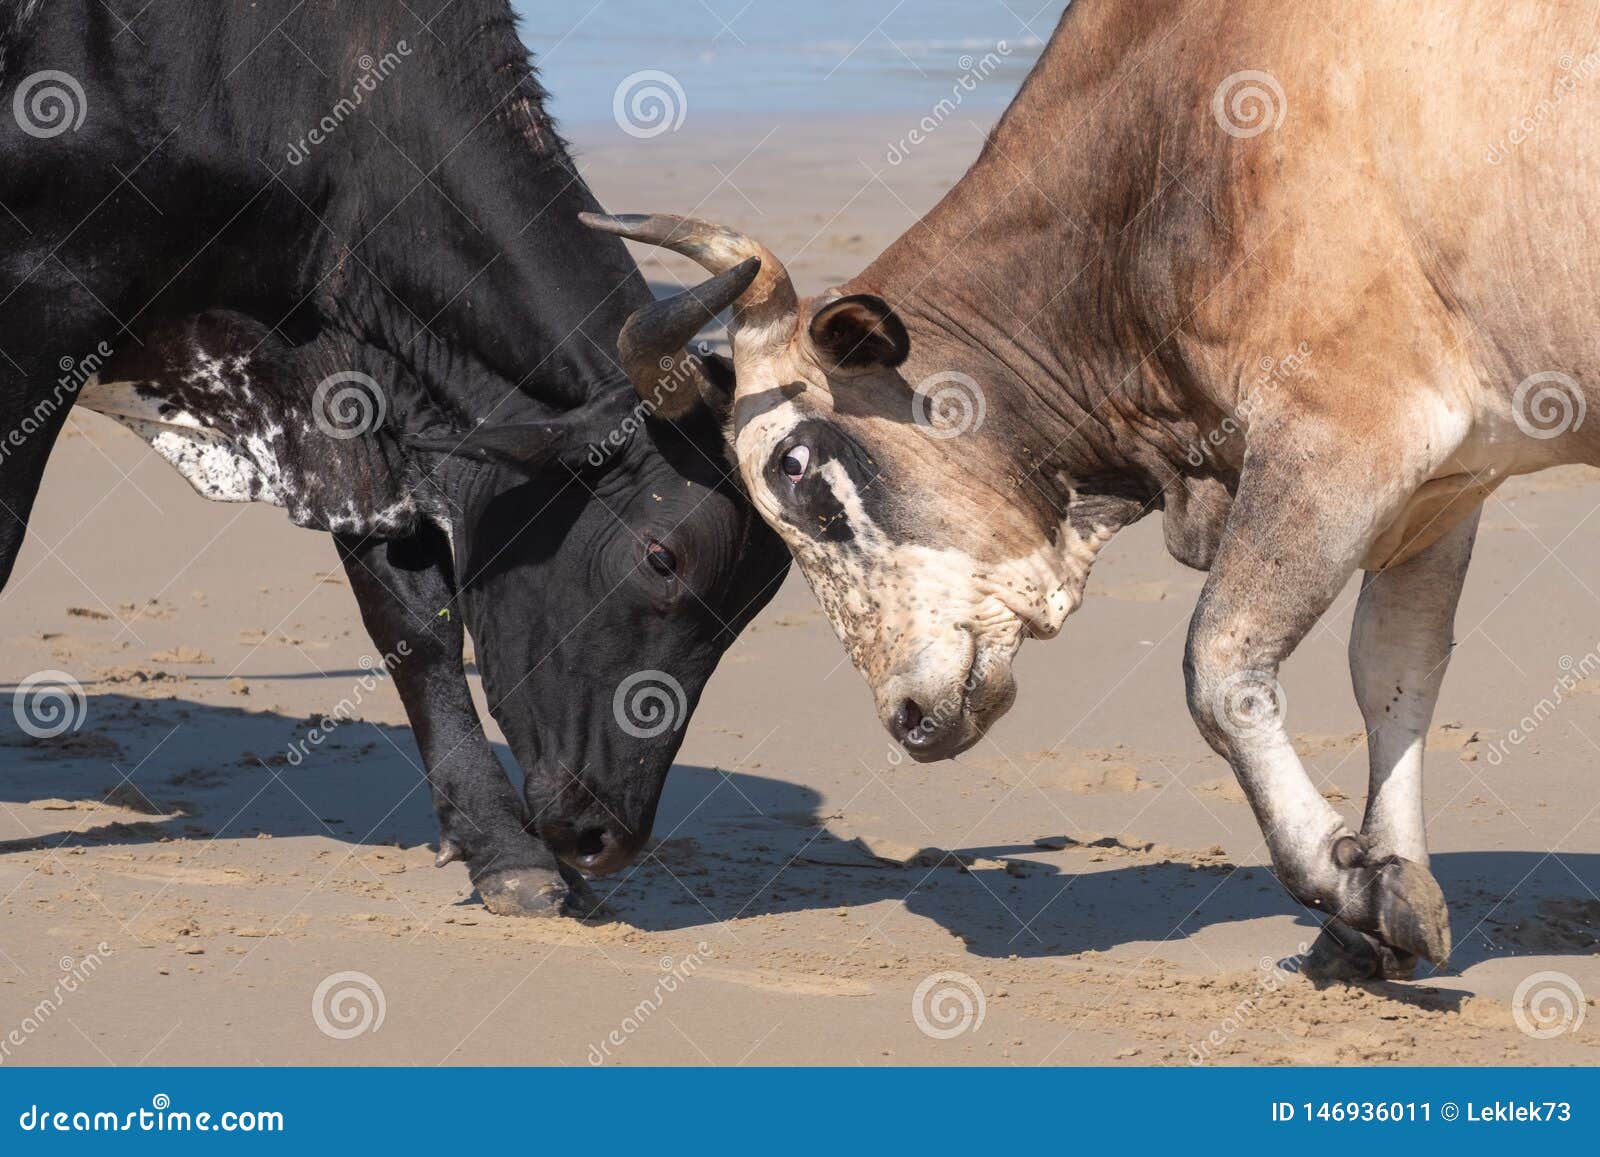 nguni cows lock horns on the beach, at second beach, port st johns on the wild coast in transkei, south africa.